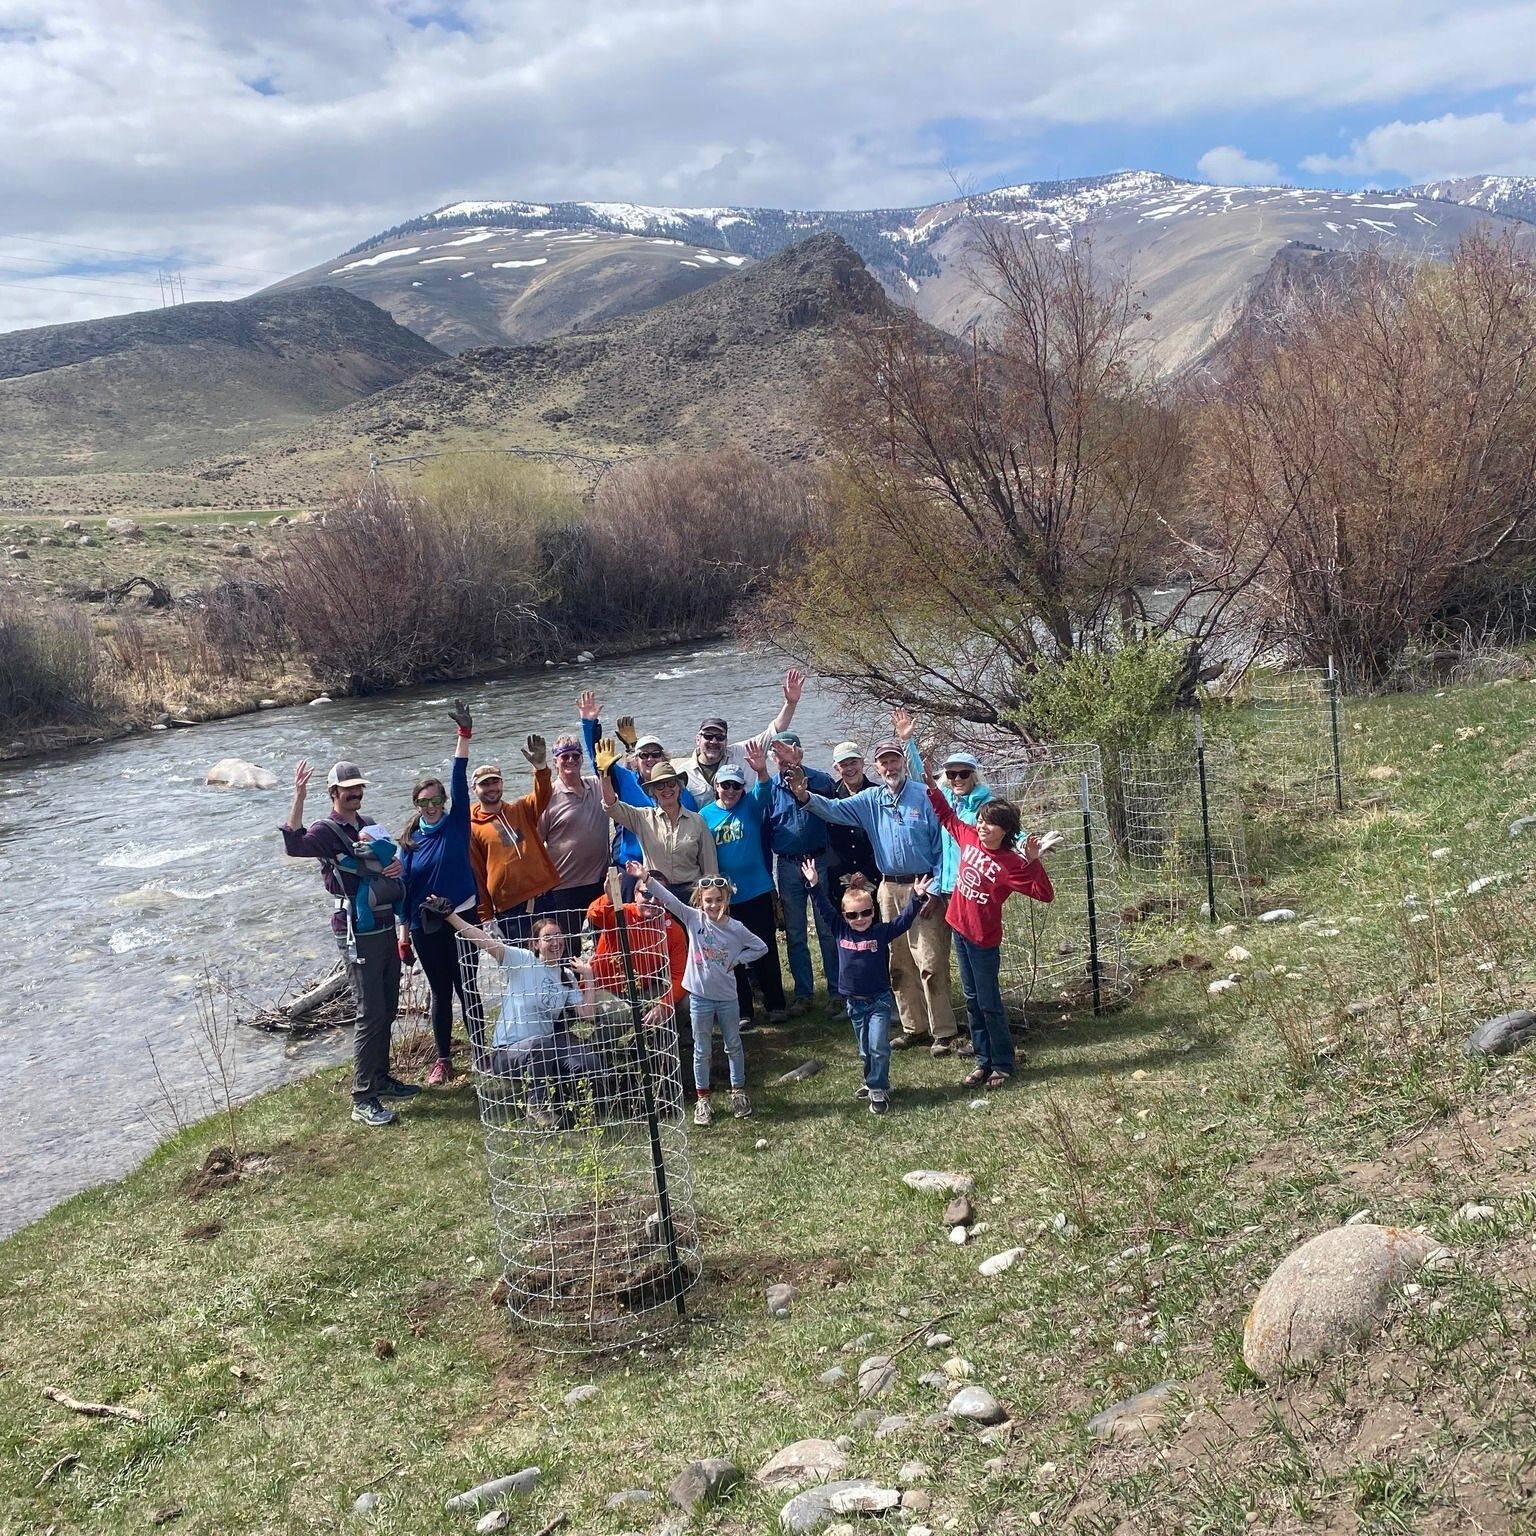 SBFC Board Members, staff, family, and friends had a great time volunteering at the @whitecloudspreserve last weekend! Volunteers planted native trees along the banks of the East Fork of the Salmon River, helping with bank stabilization, sedimentatio